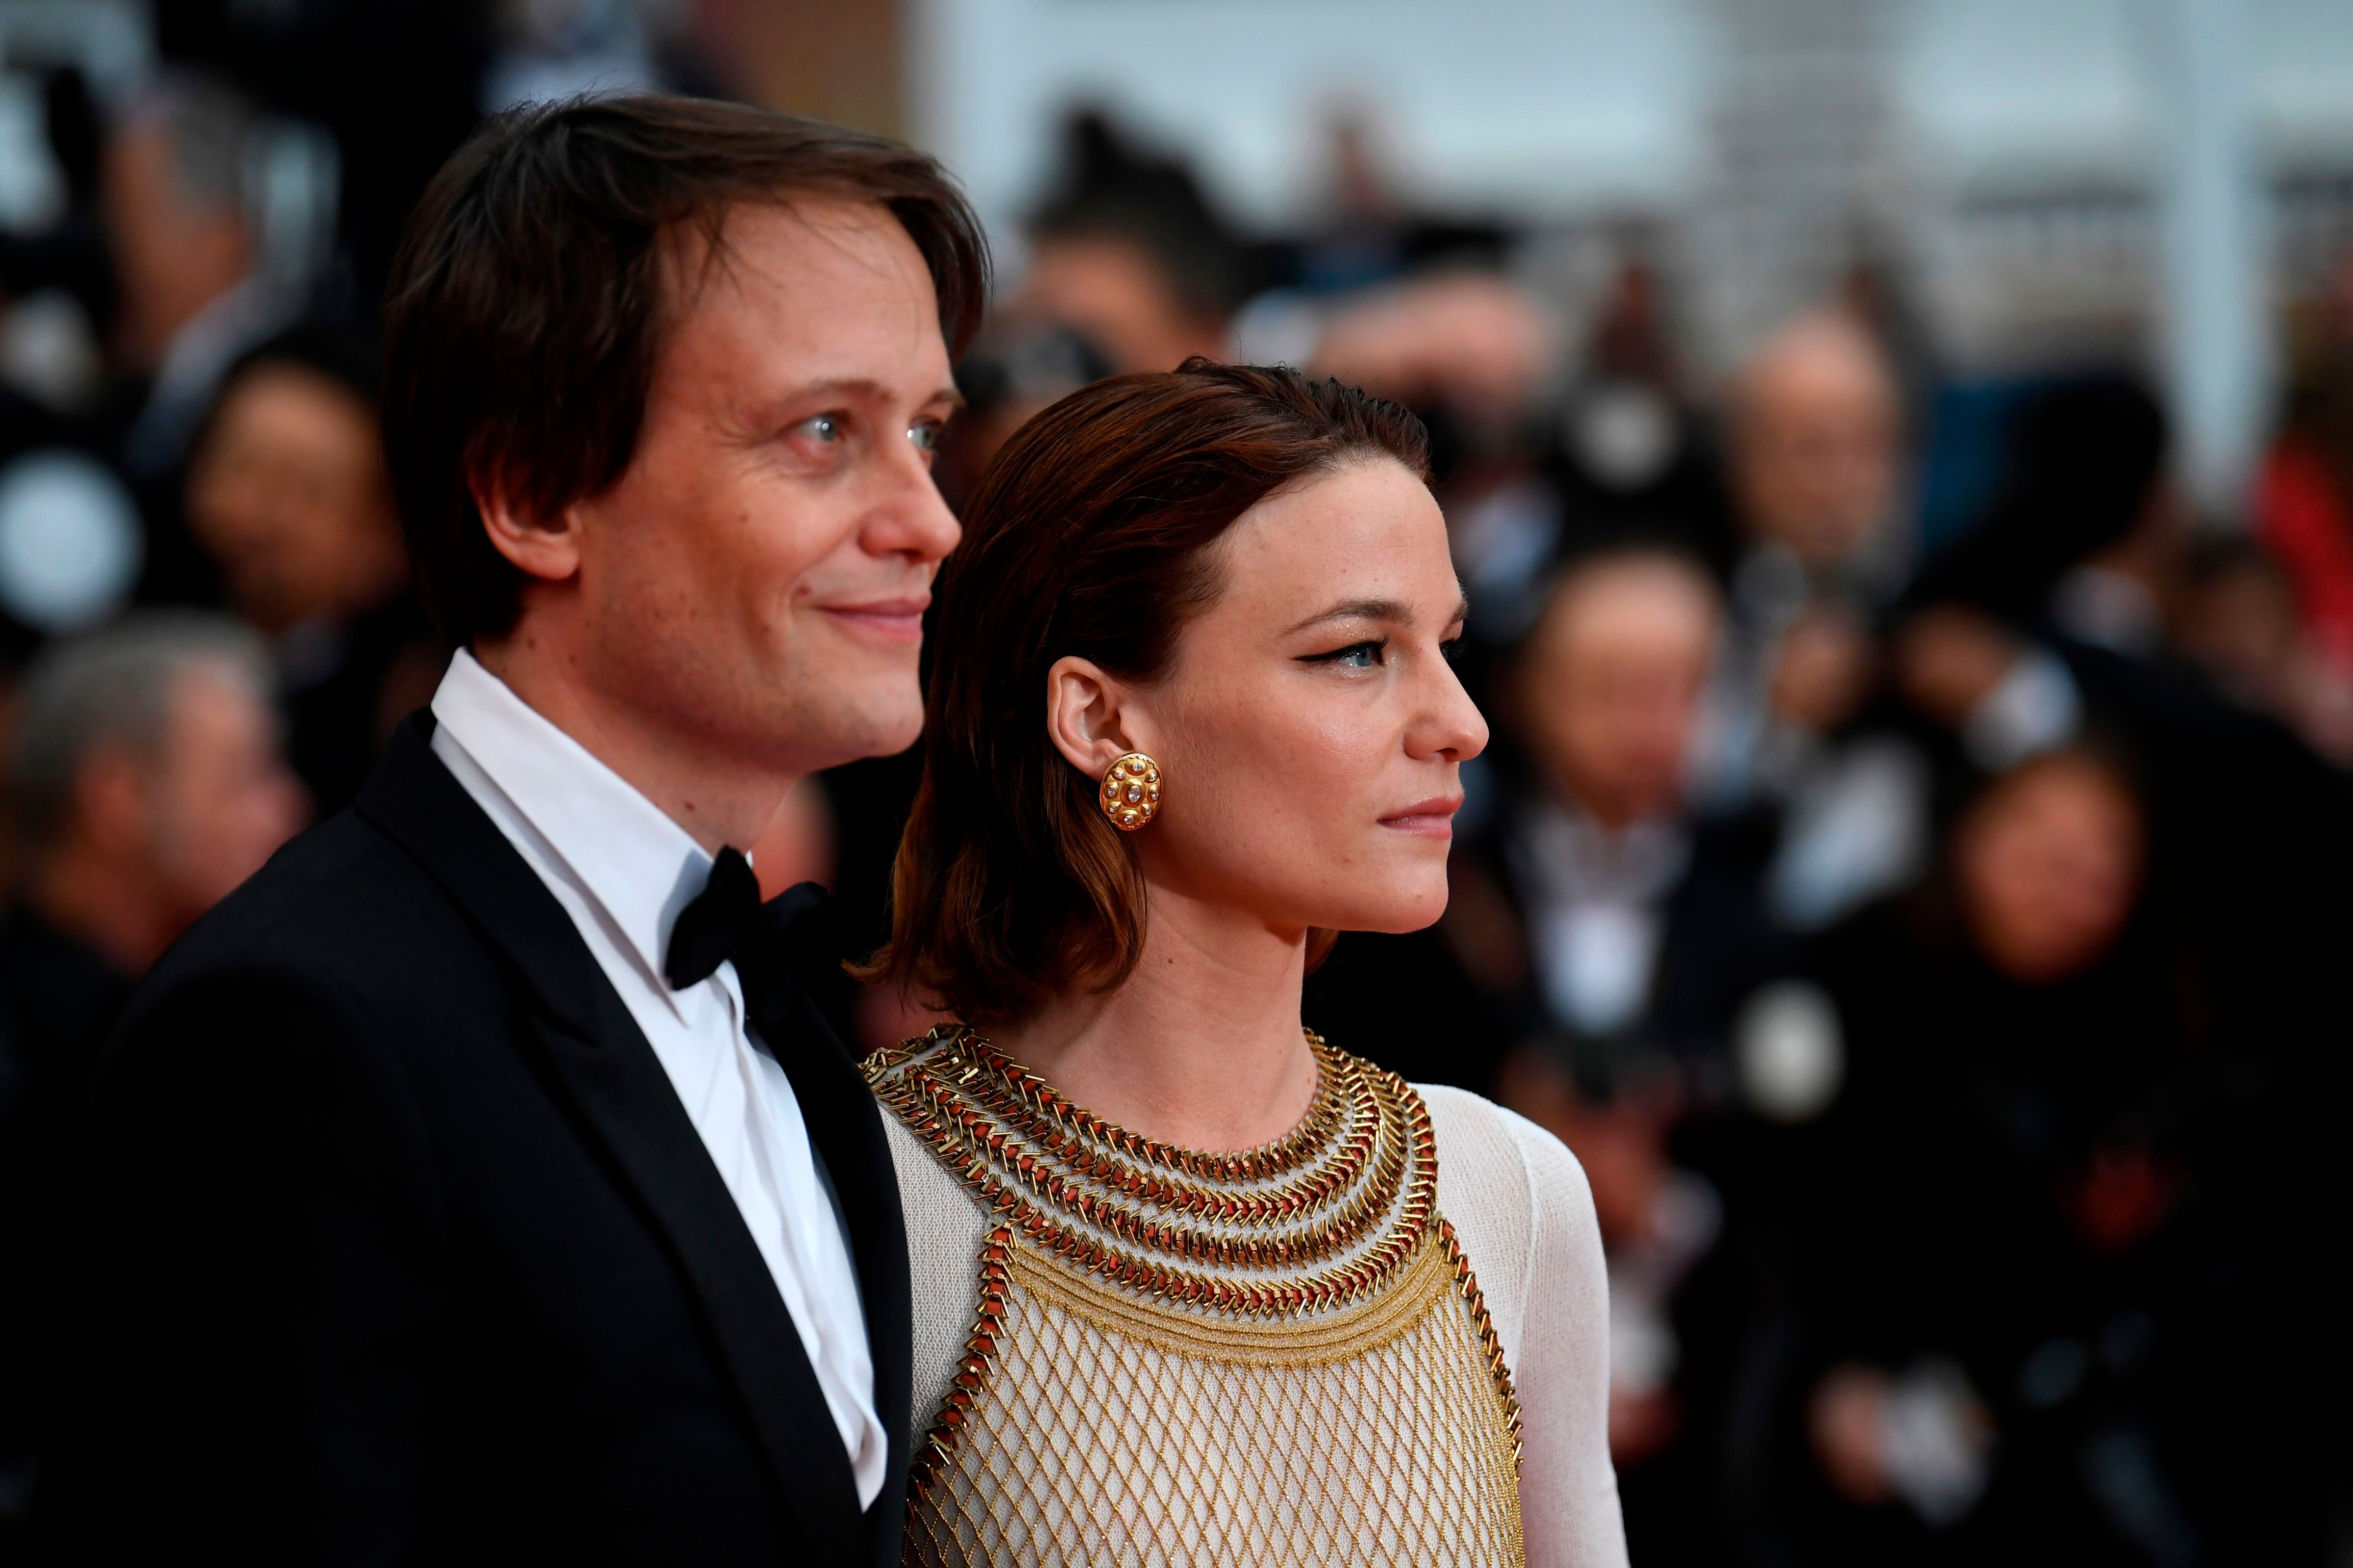 German actor August Diehl and Austrian actress Valerie Pachner arrive for the screening of the film "A Hidden Life" at the 72nd edition of the Cannes Film Festival on May 19, 2019. (CHRISTOPHE SIMON&mdash;AFP/Getty Images)